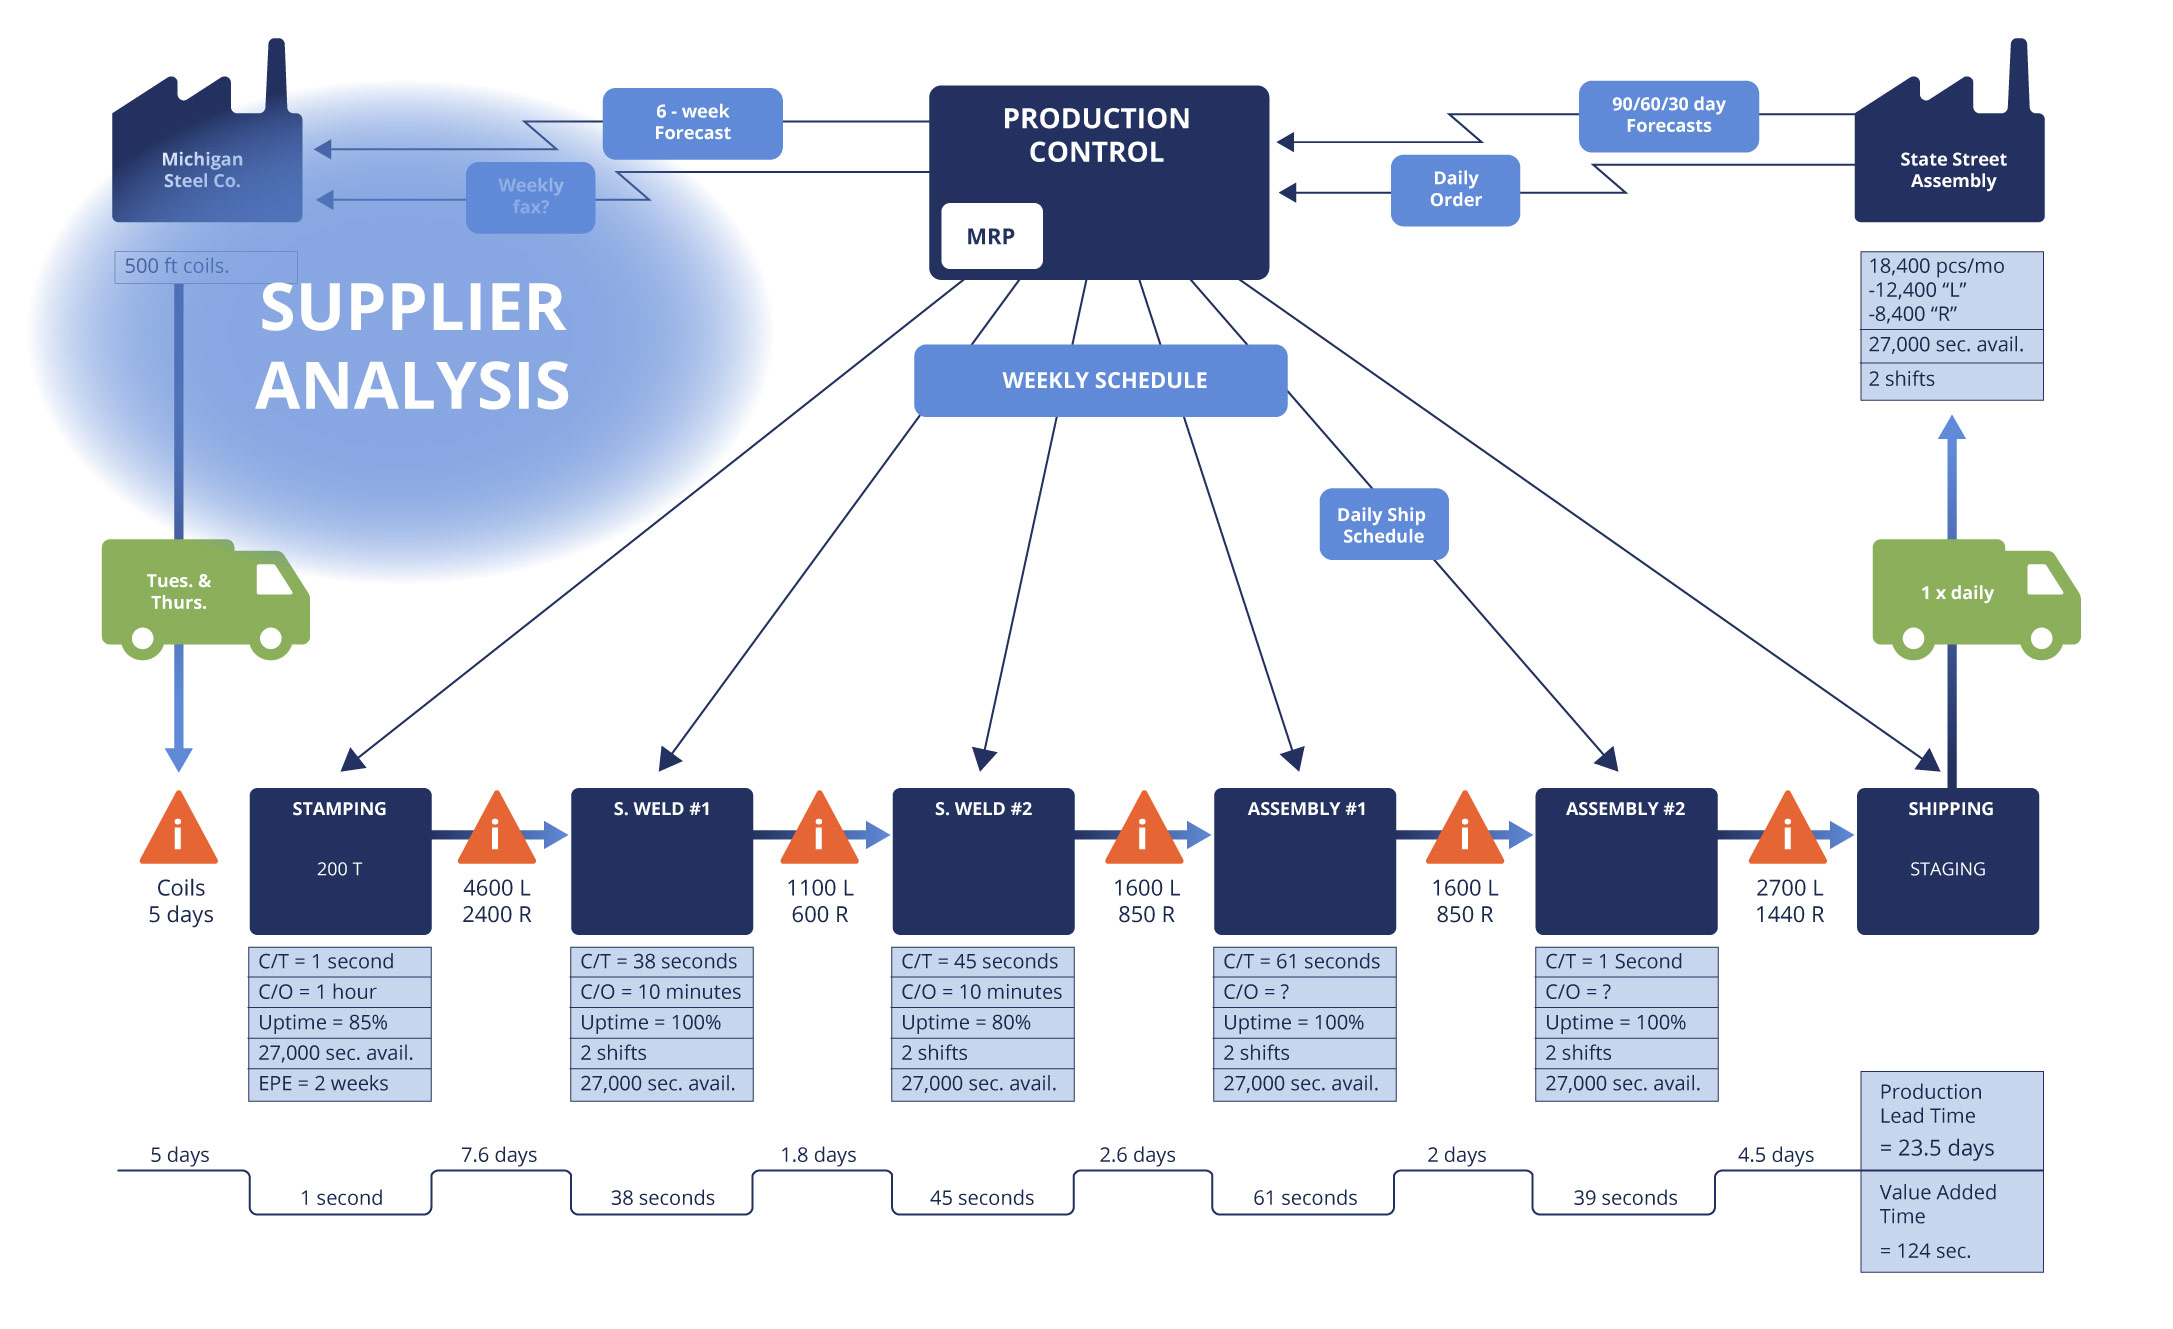 Value Stream Map Supplier Analysis ?width=3260&name=value Stream Map Supplier Analysis 